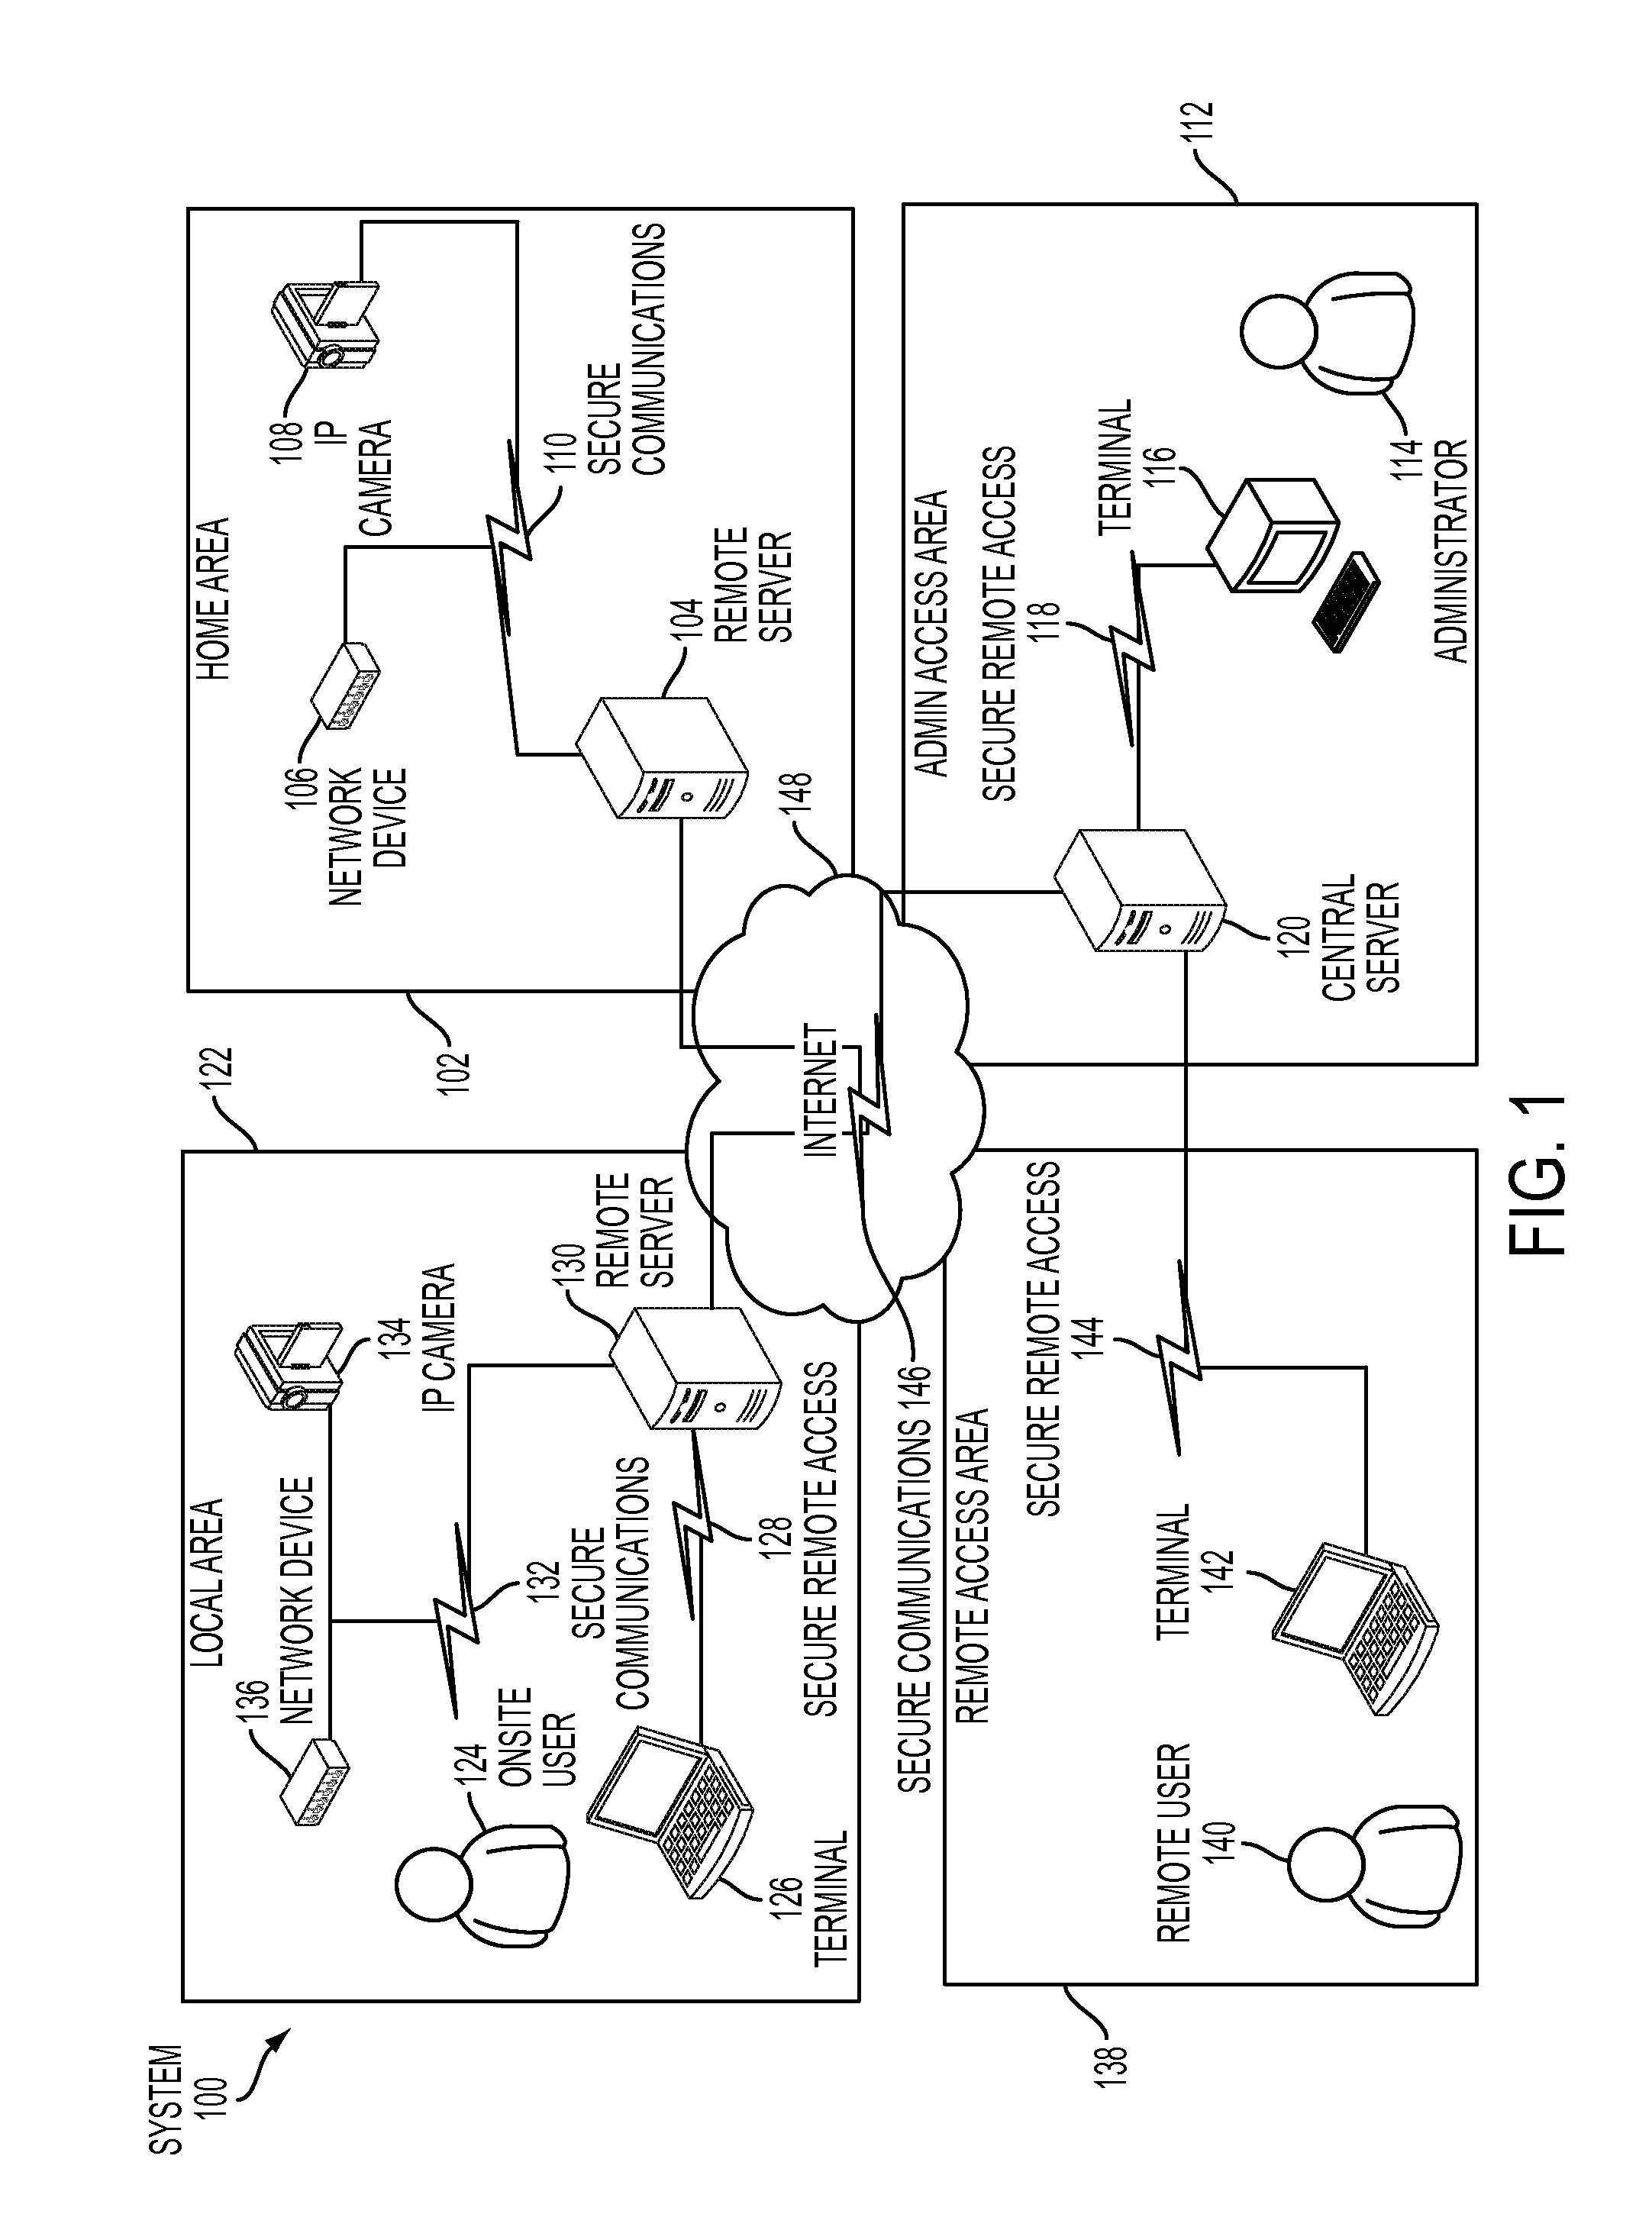 System and method for secure access of a remote system